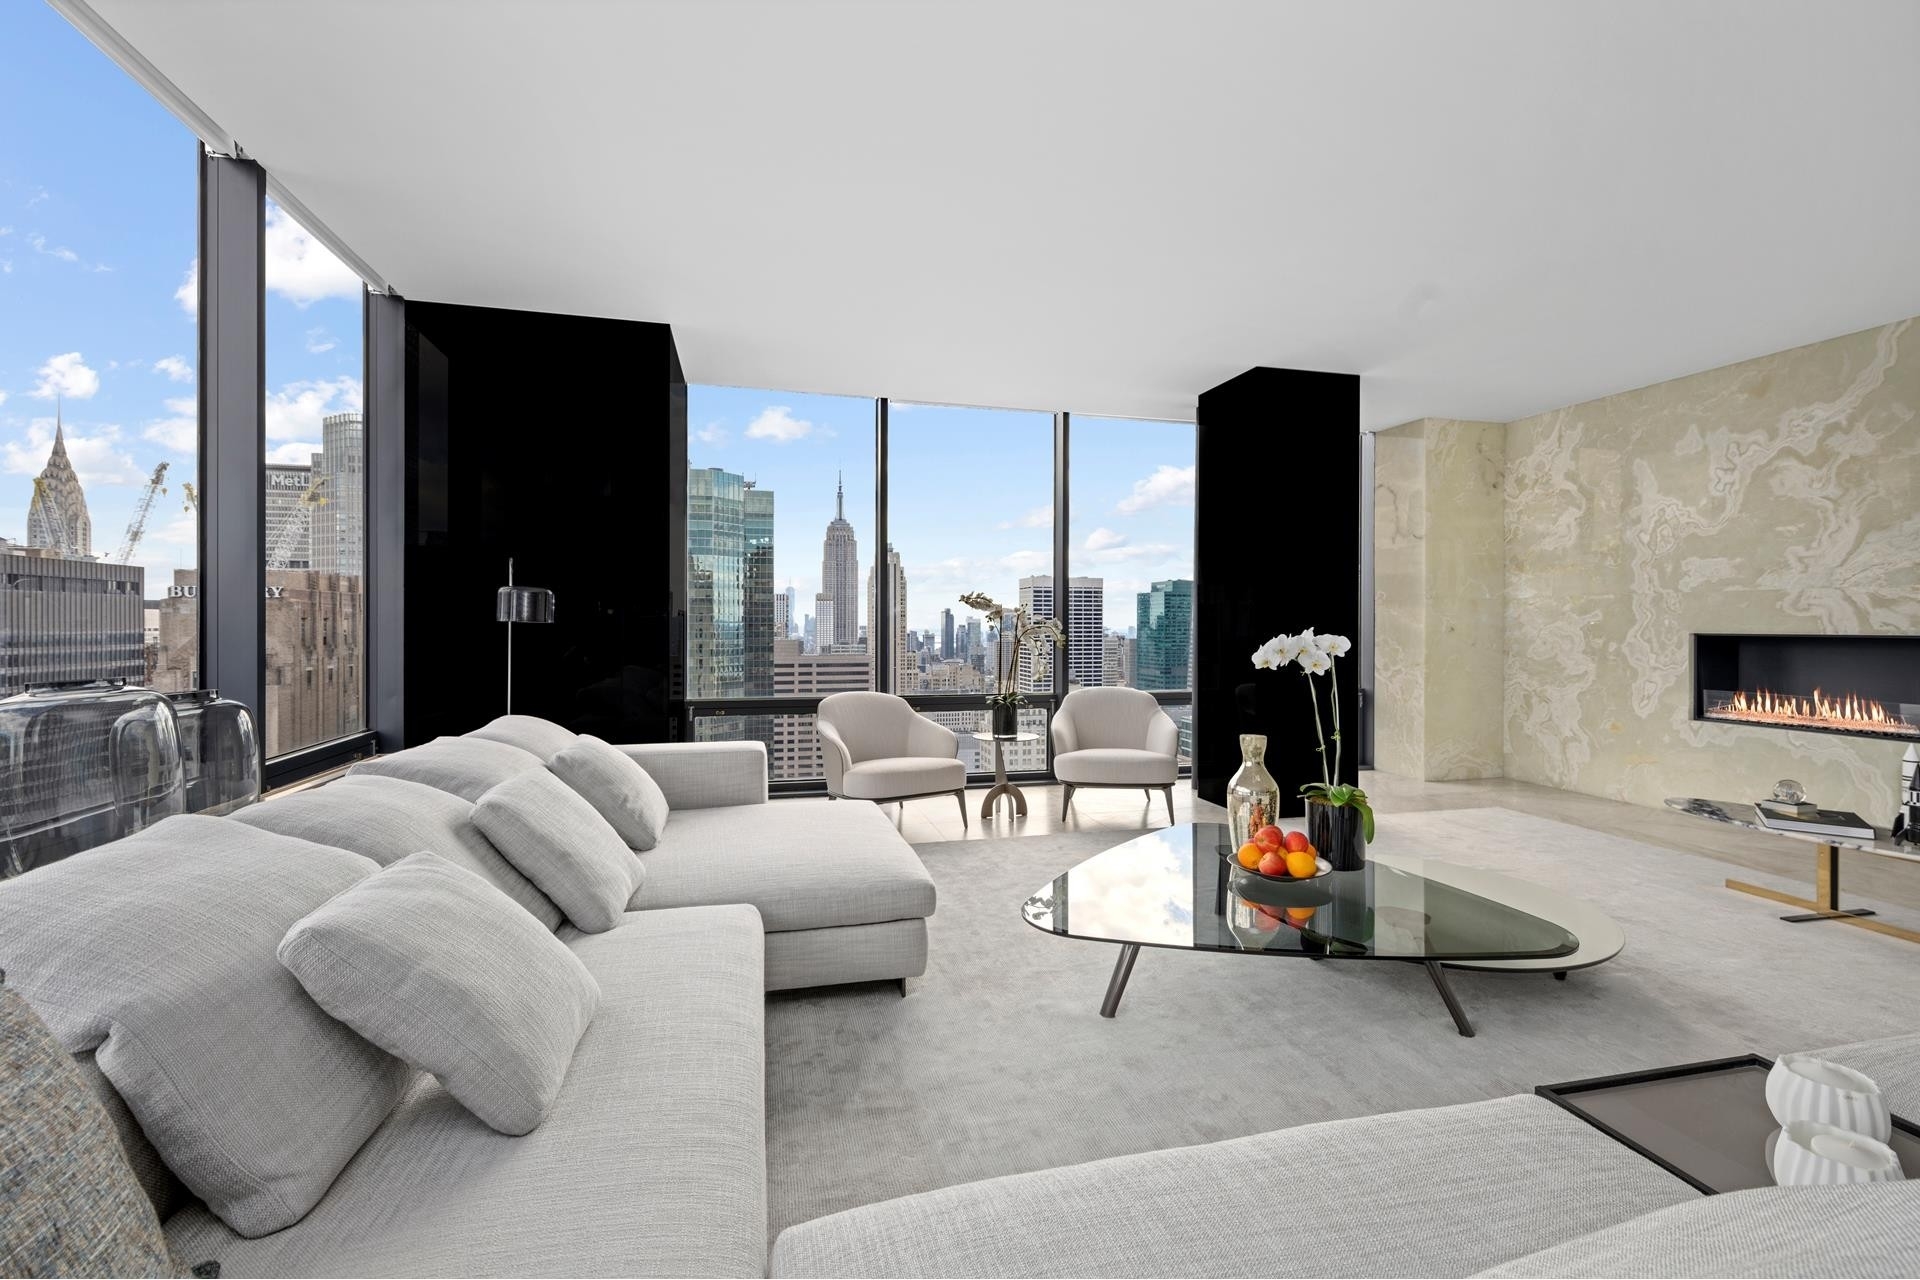 Property at Olympic Tower, 641 FIFTH AVE, 42DE Midtown East, New York, New York 10022